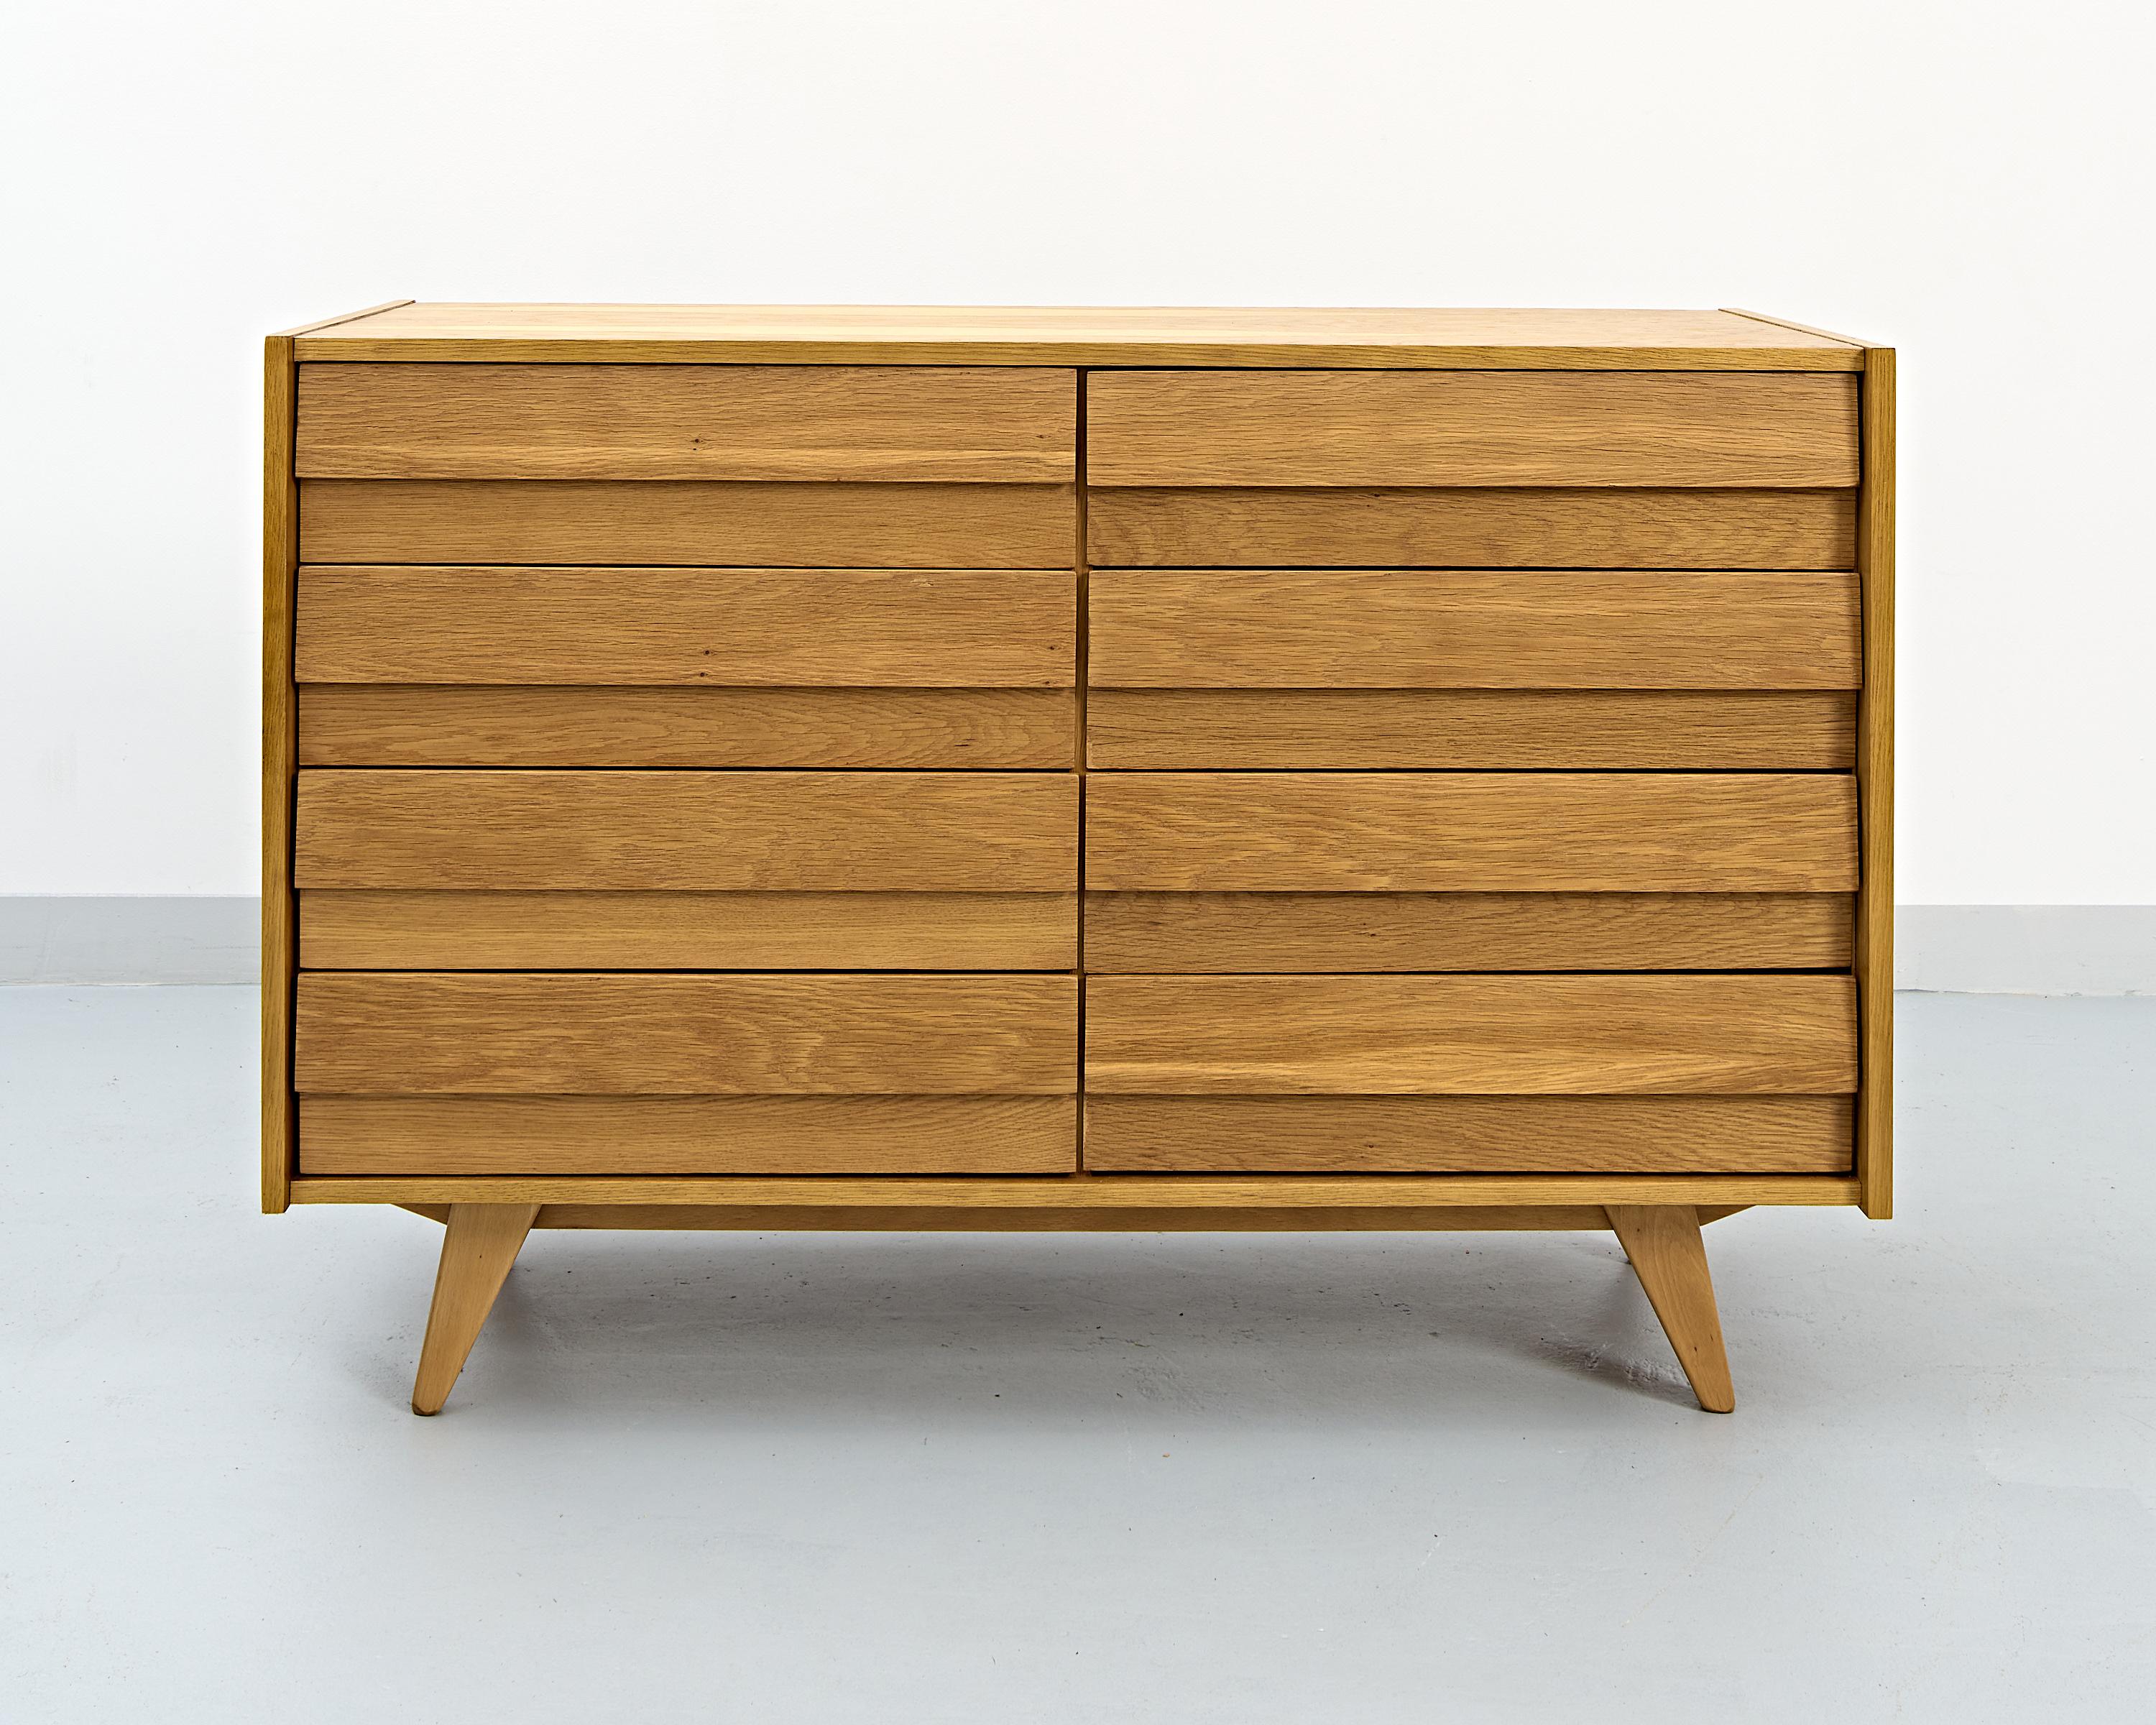 The U-453 sideboard designed by the world renown czech designer Jiří Jiroutek as a part of the U series. Works began after the enormous success of the czech pavilion at the Brussels ’58 Expo and the series became one of the leading examples of the